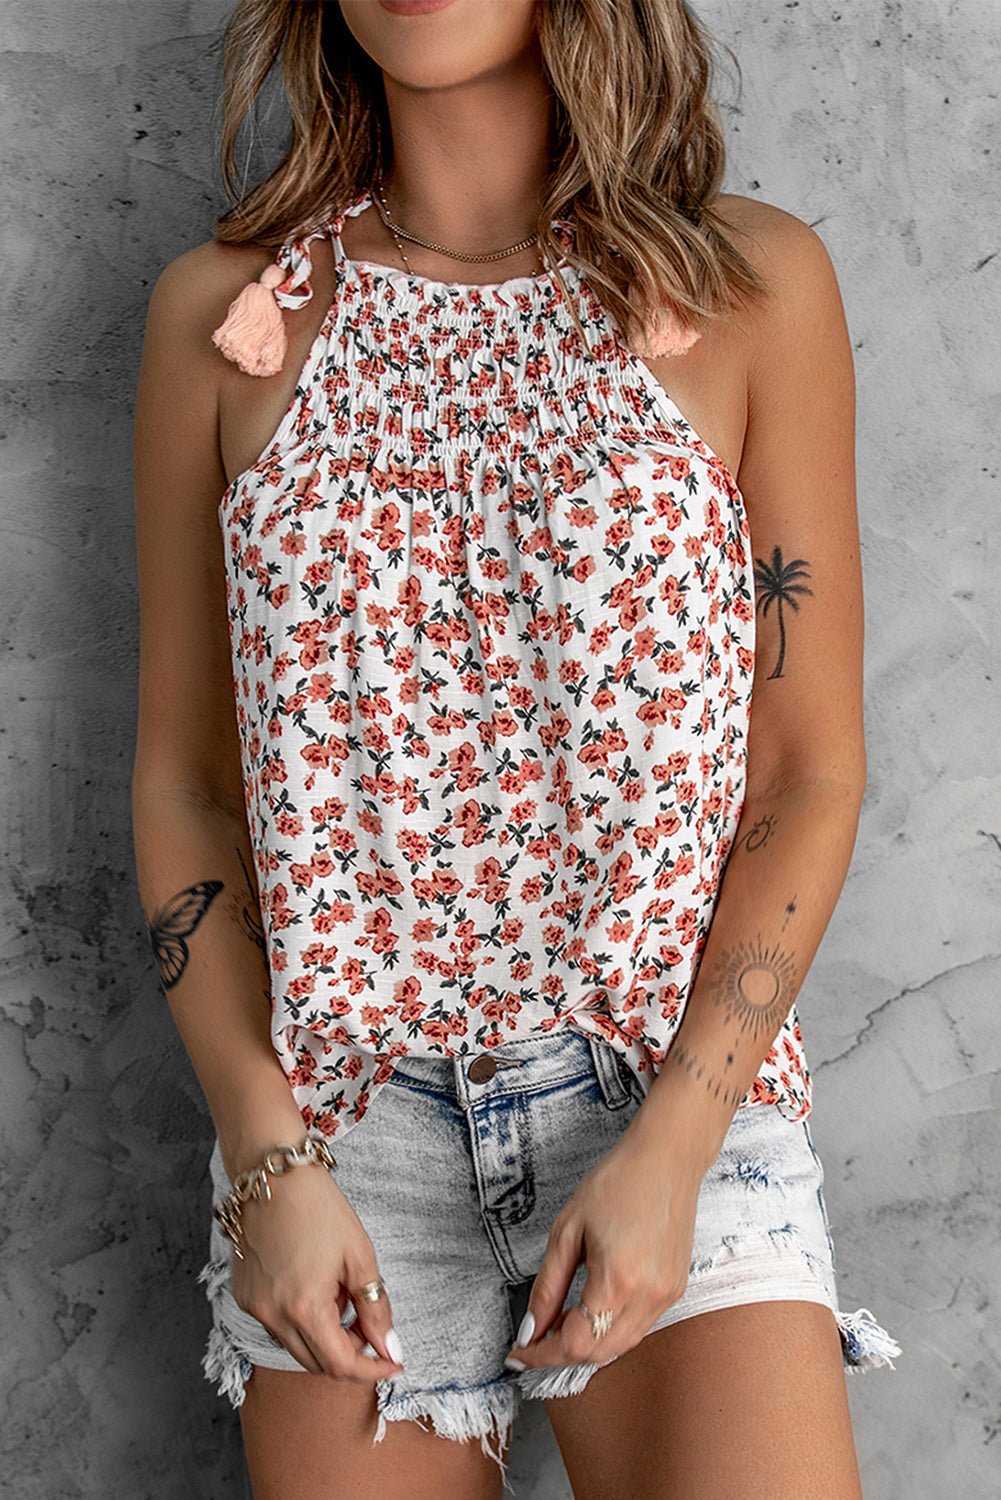 Floral Tied Tassel Cami - Embrace the Charm of a Blooming Field and Feel Like a Radiant Goddess with our Romantic and Bohemian-inspired Top. - Guy Christopher